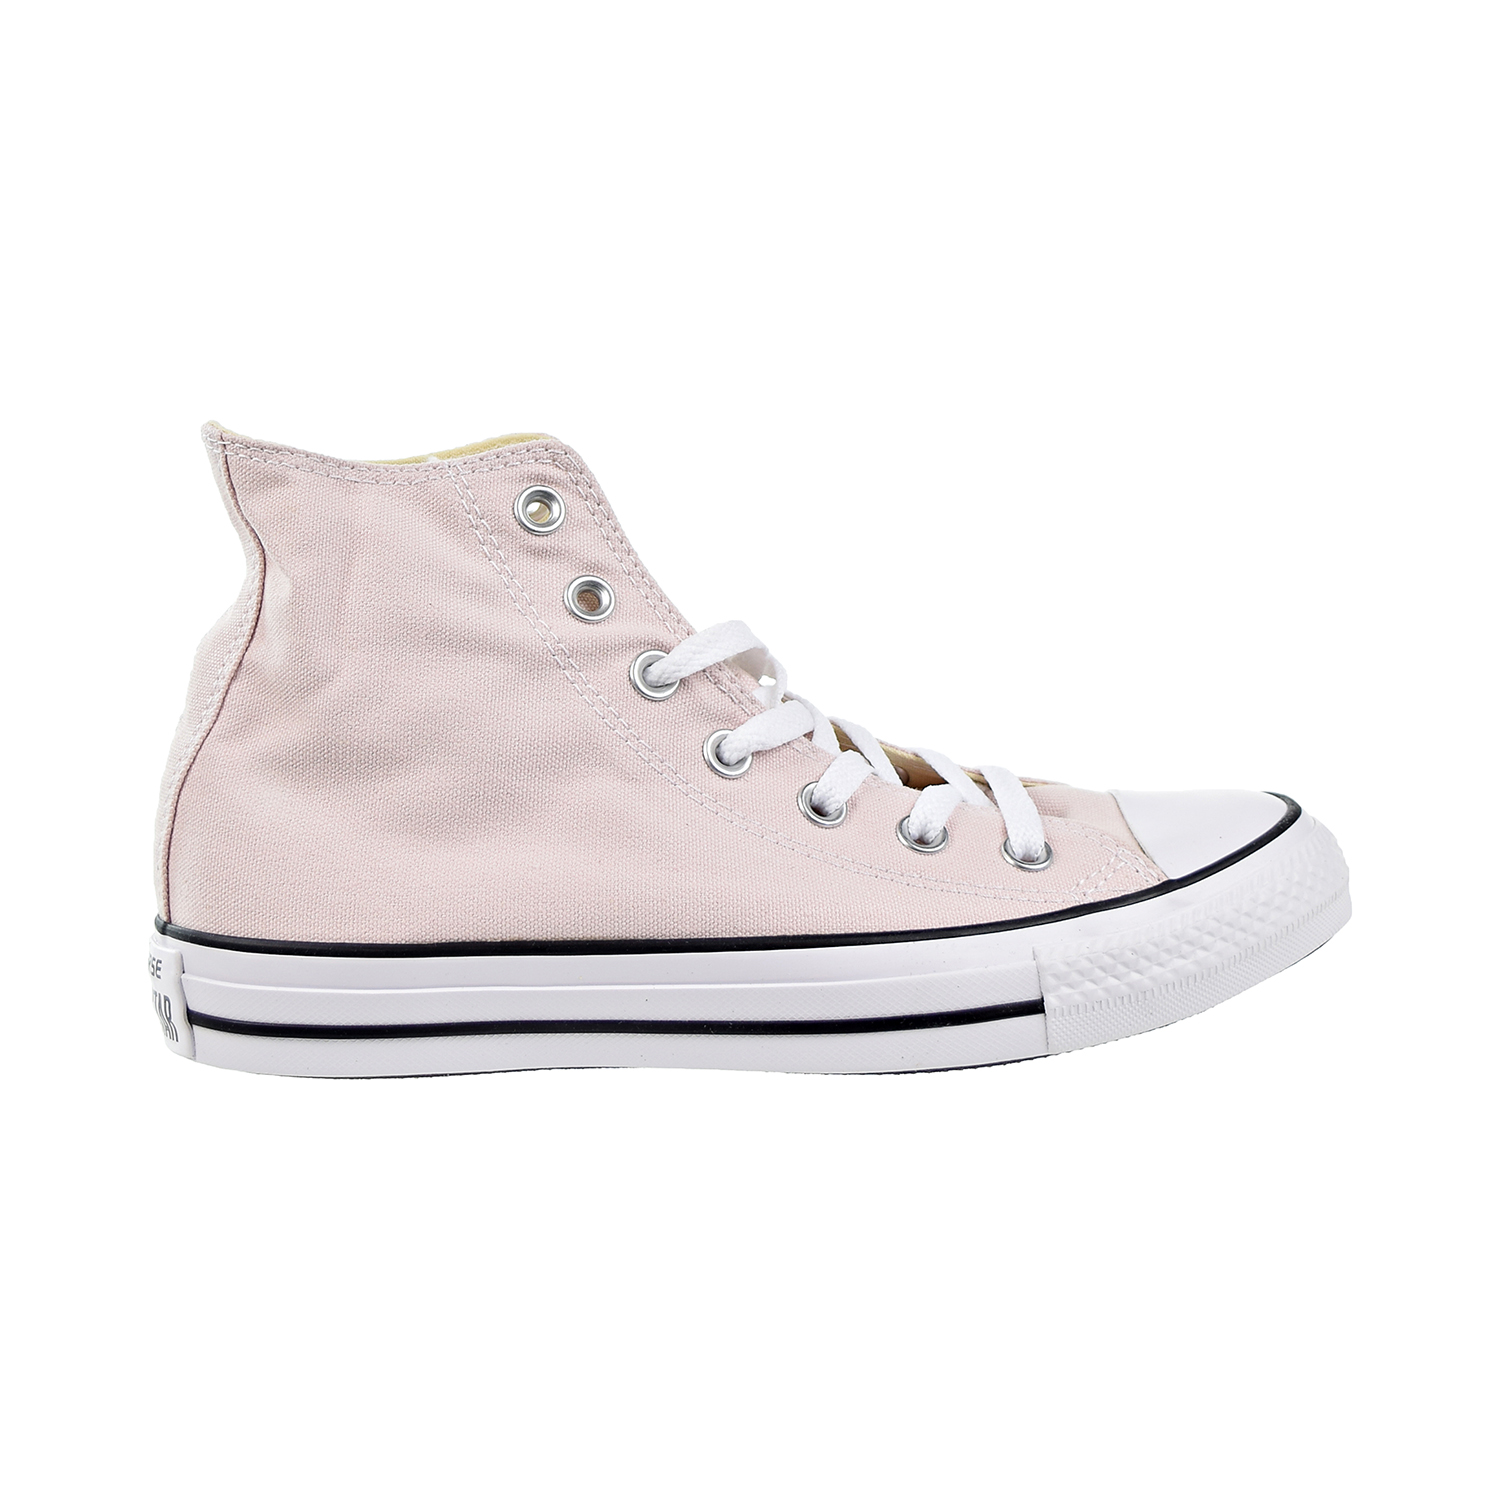 Converse Chuck Taylor All Star Hi Mens Shoes Barely Pink  159619f - image 1 of 6